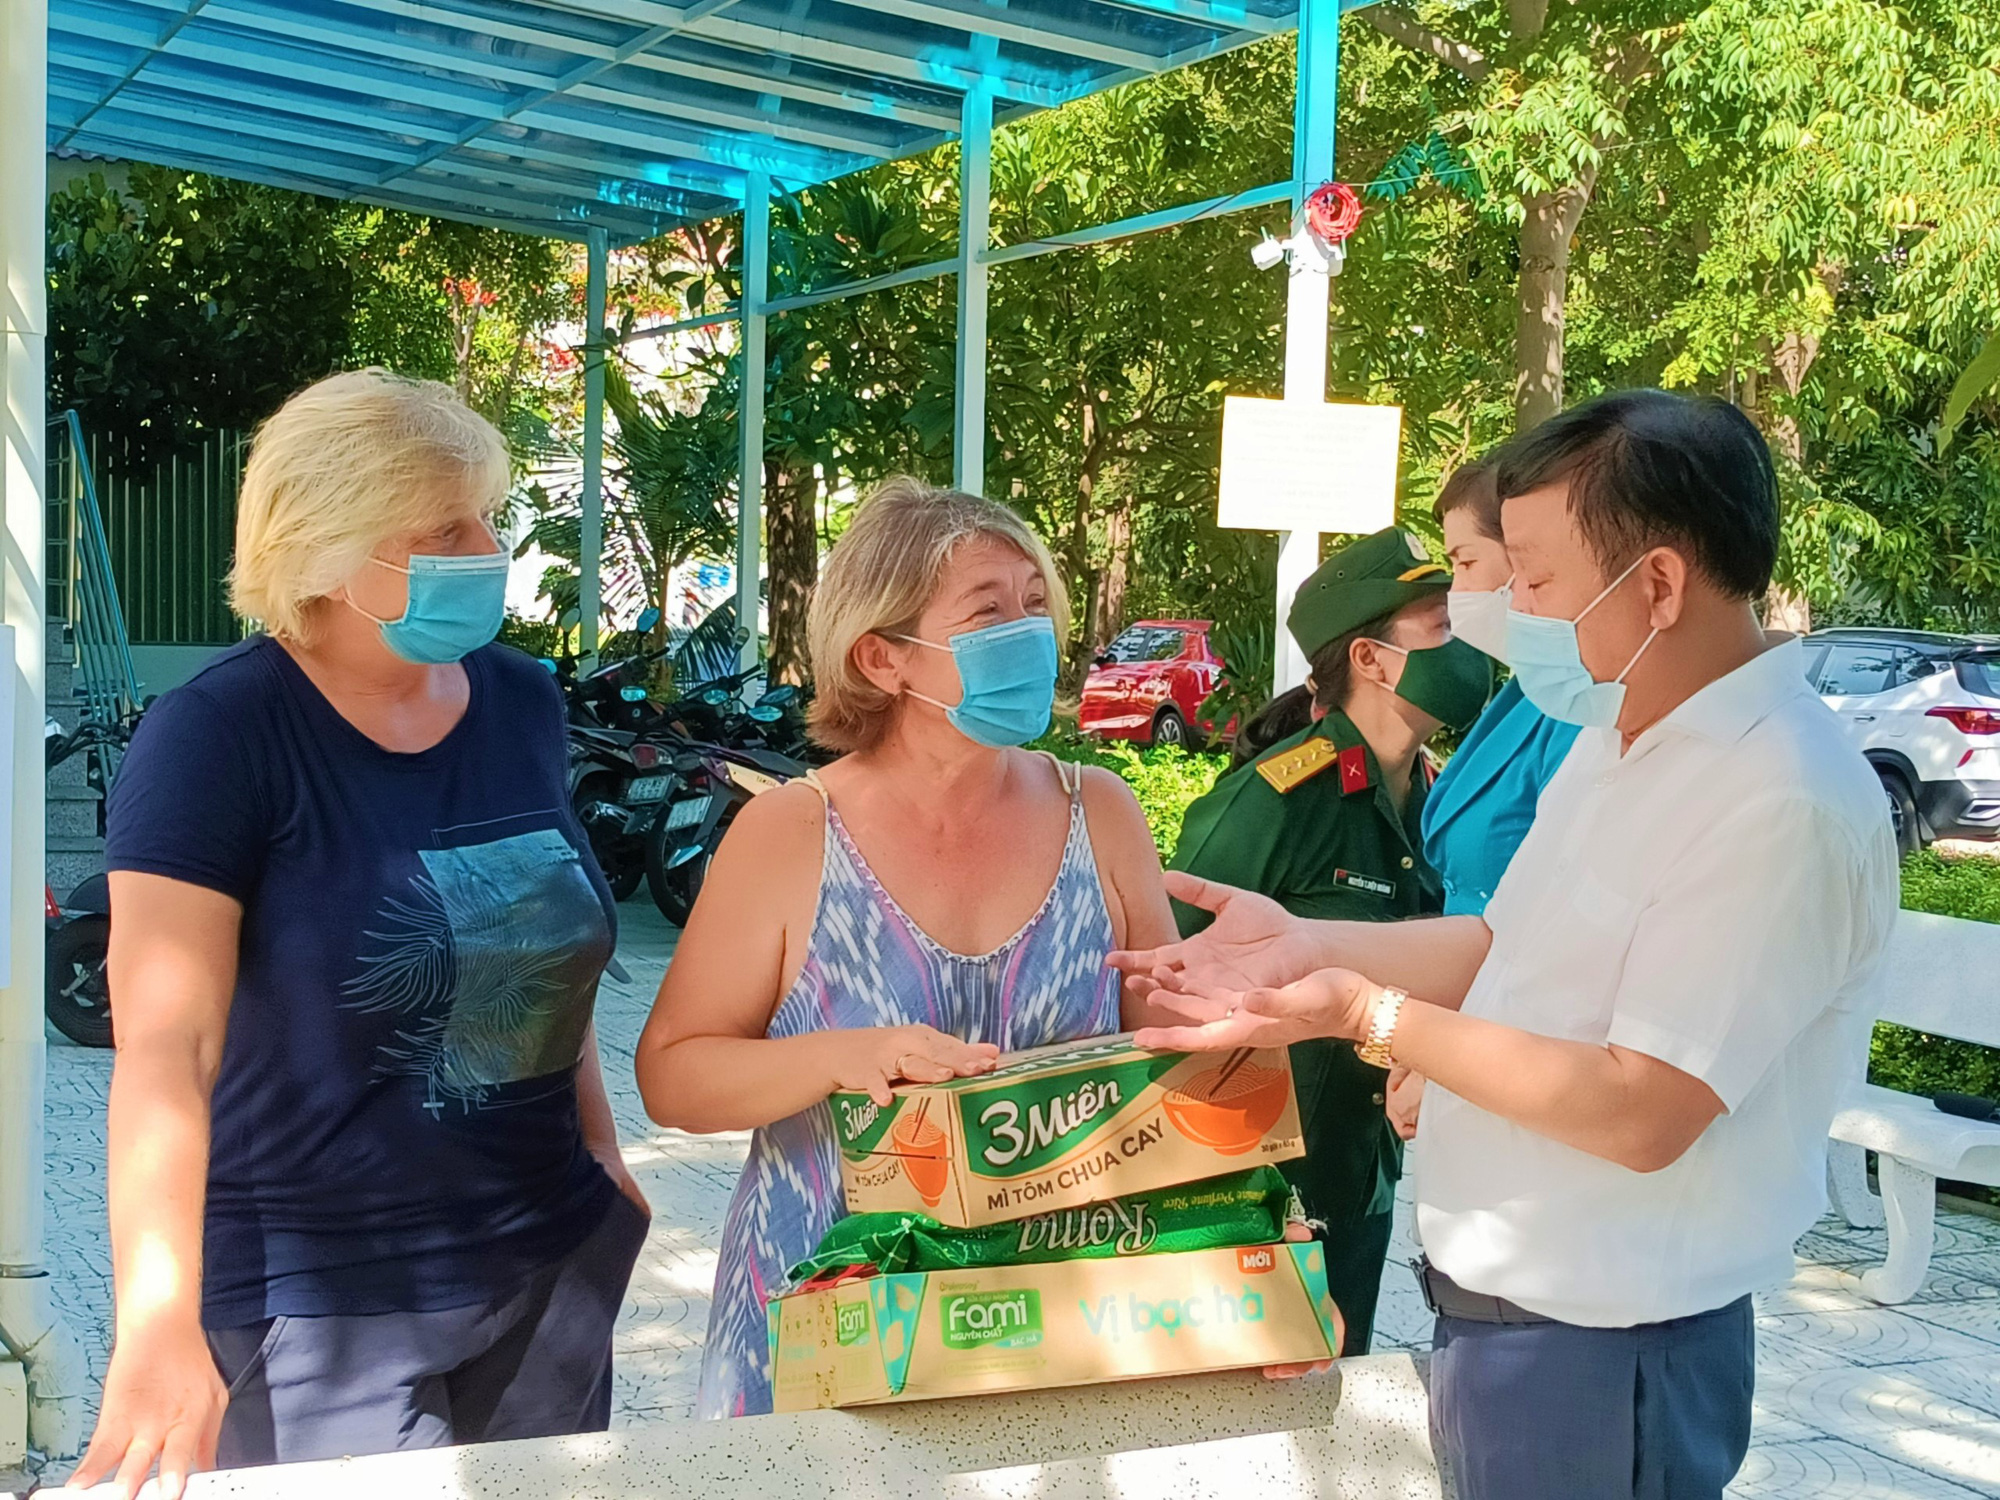 100 Russians receive food aid amid COVID-19 pandemic in Vietnam’s Nha Trang City